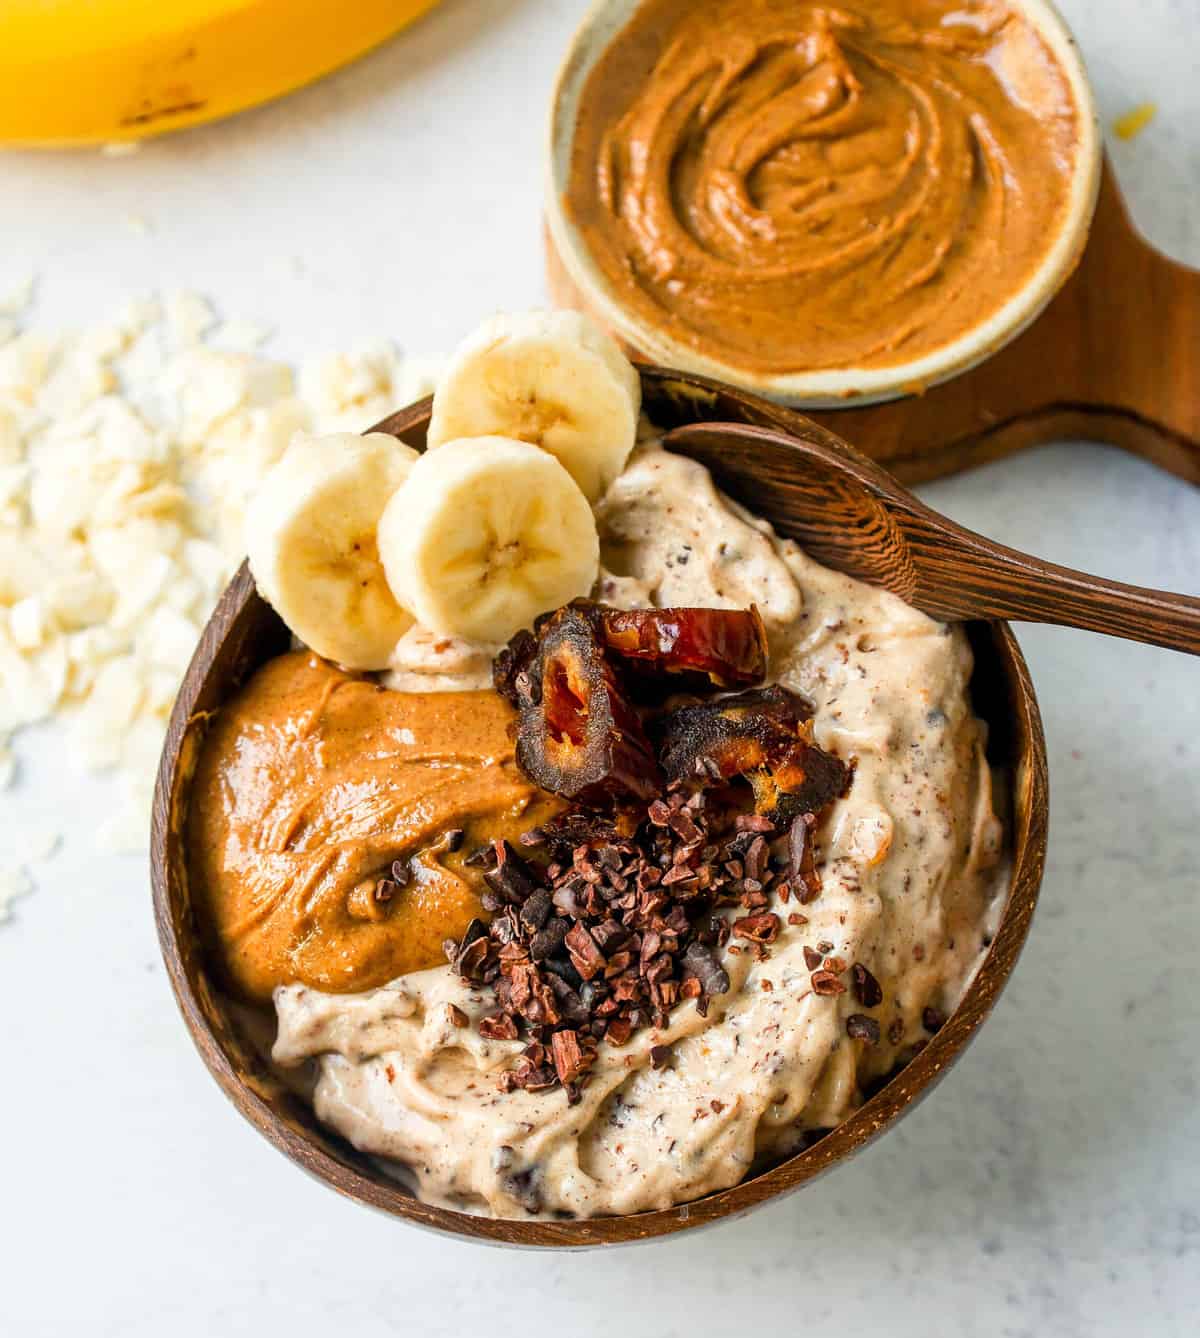 Chunky Monkey Chocolate Peanut Butter Banana Smoothie Bowl:

This one is for all of my peanut butter lovers out there! This is my chunky, crunchy, creamy, nutty peanut butter smoothie bowl.